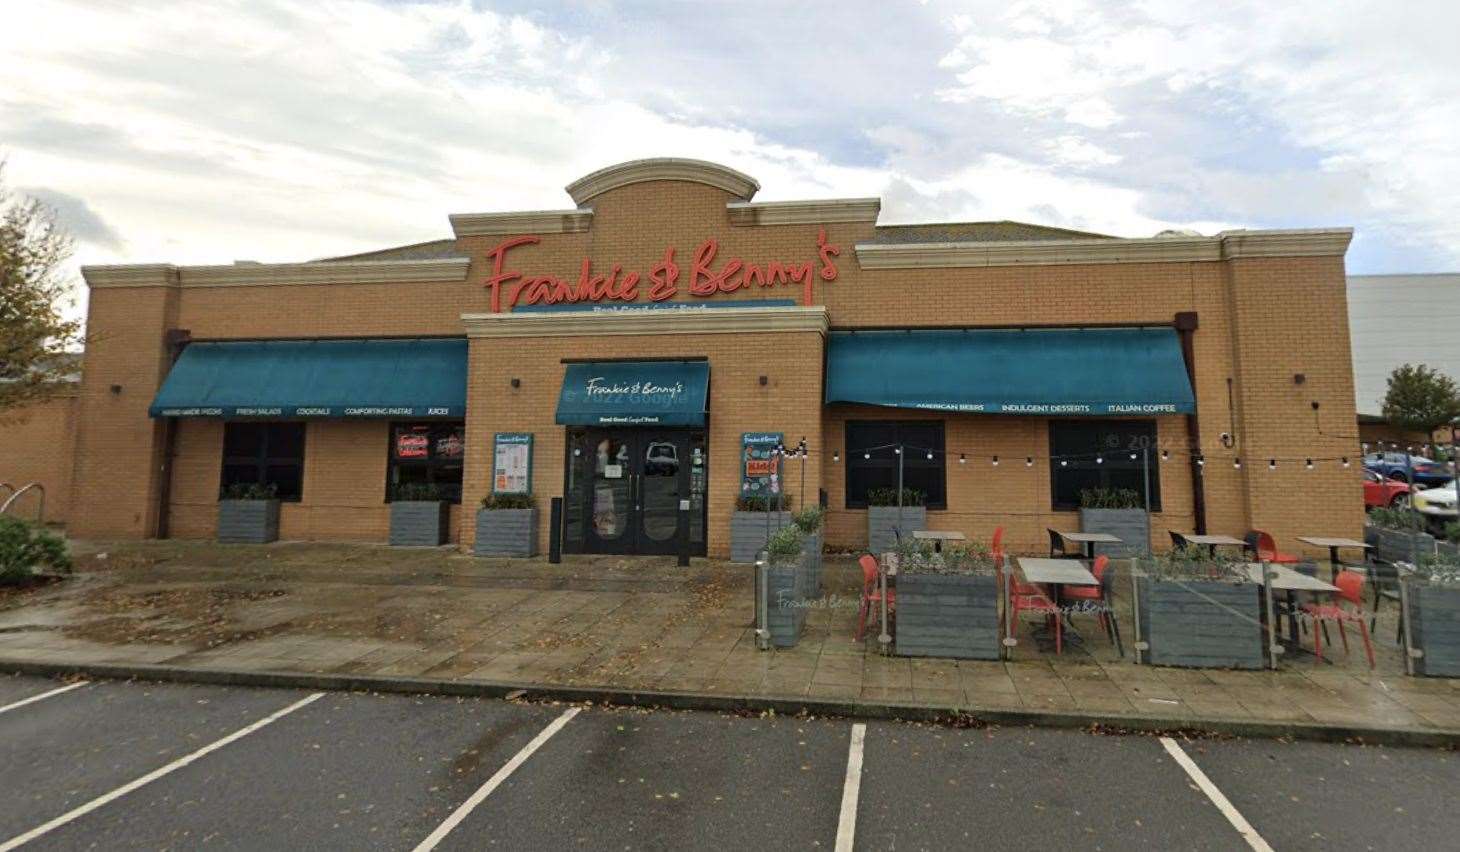 The incident occurred at Frankie & Benny’s at Westwood Cross shopping centre in Broadstairs. Photo: Google Maps